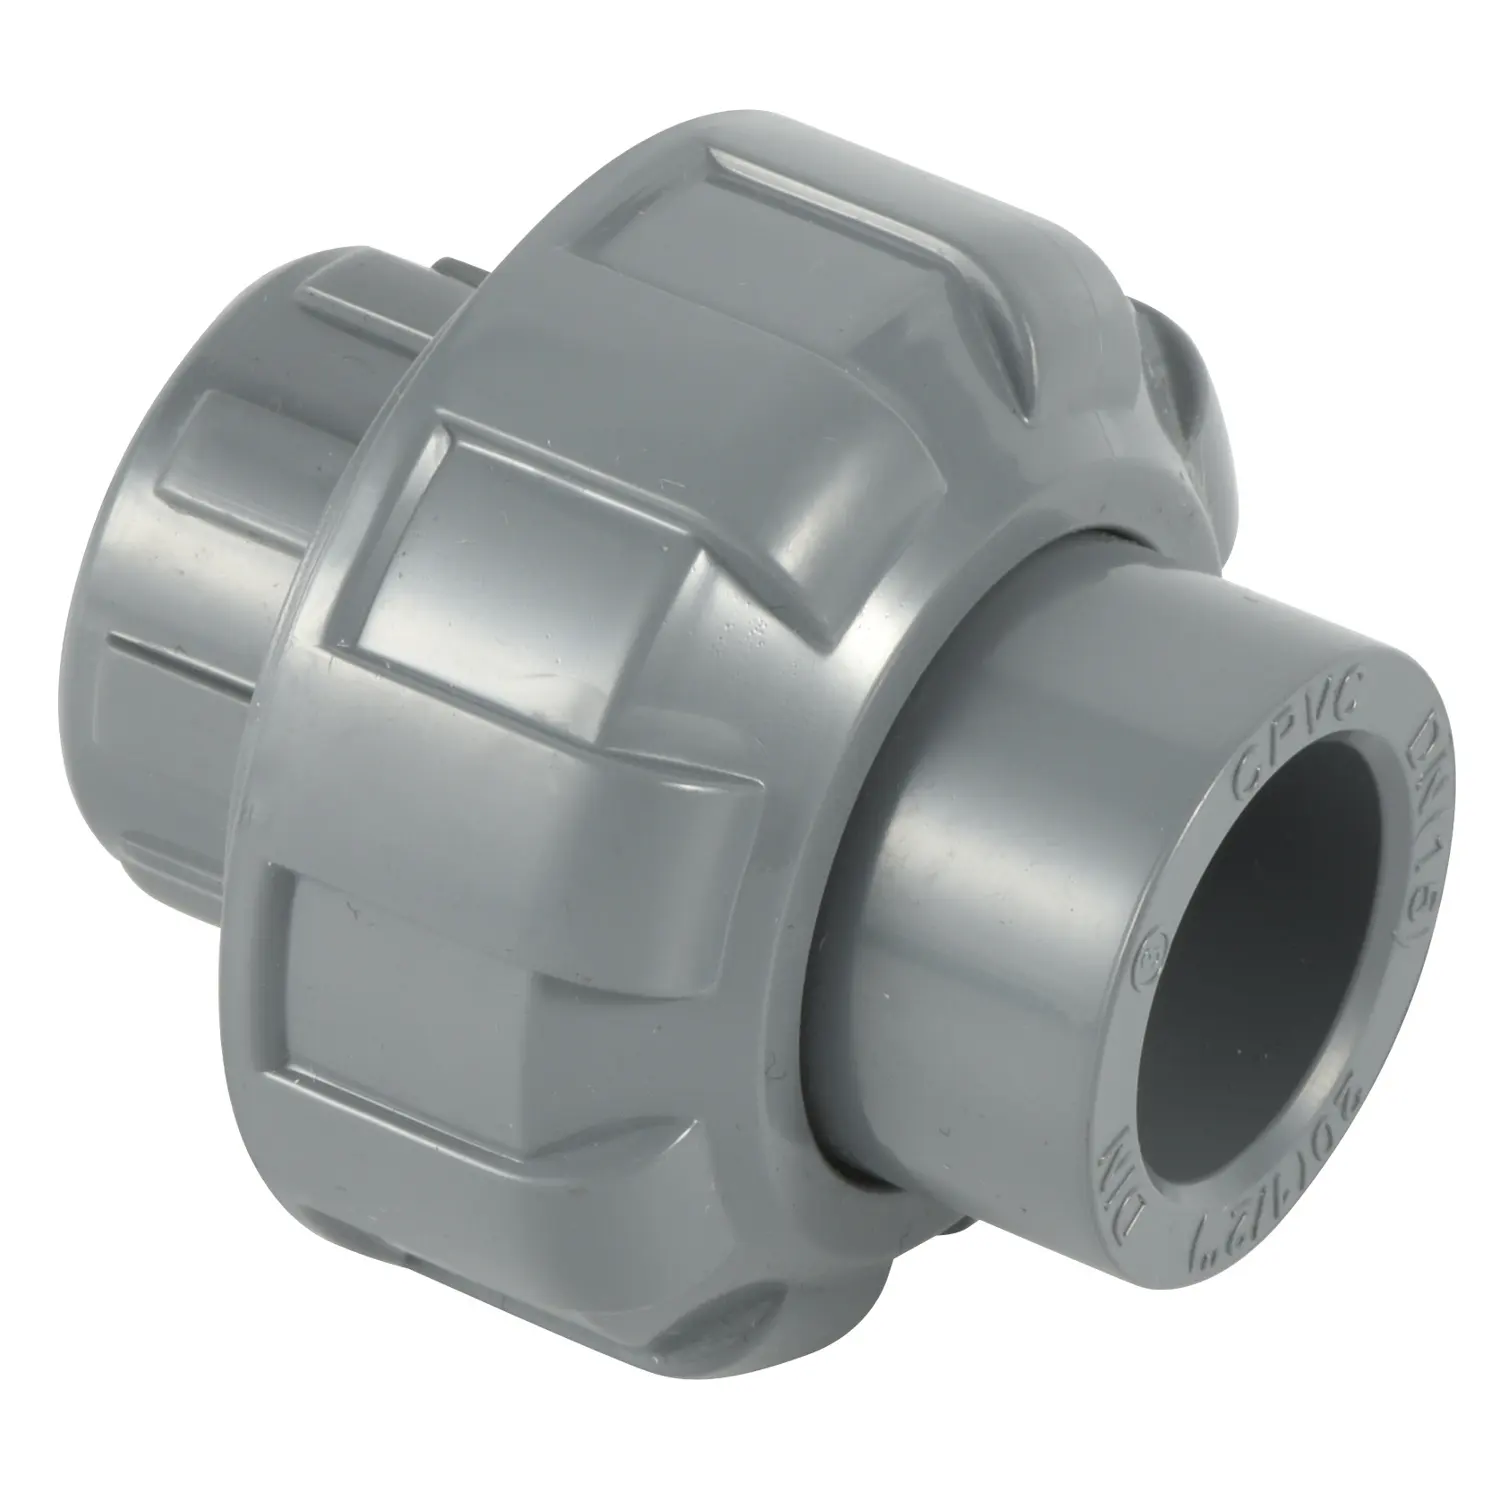 CPVC PVC Union Plumbing Materials Plastic Pipe Fitting 1/2インチTwo Way Pipe Connection